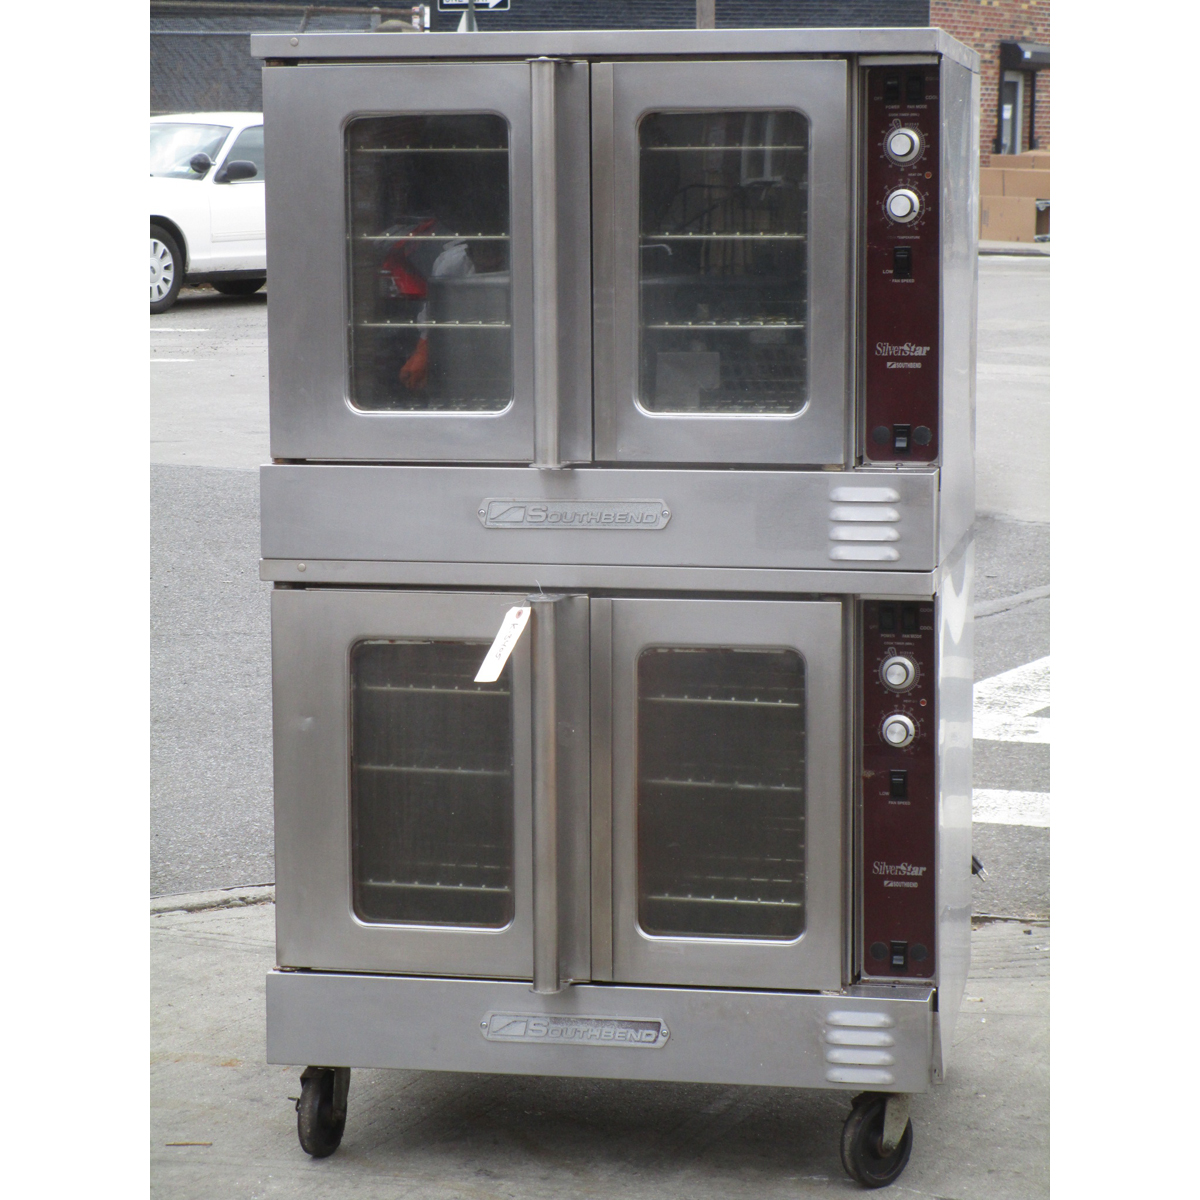 Southbend SLGS/22SC Gas Convection Oven, Used Great Condition